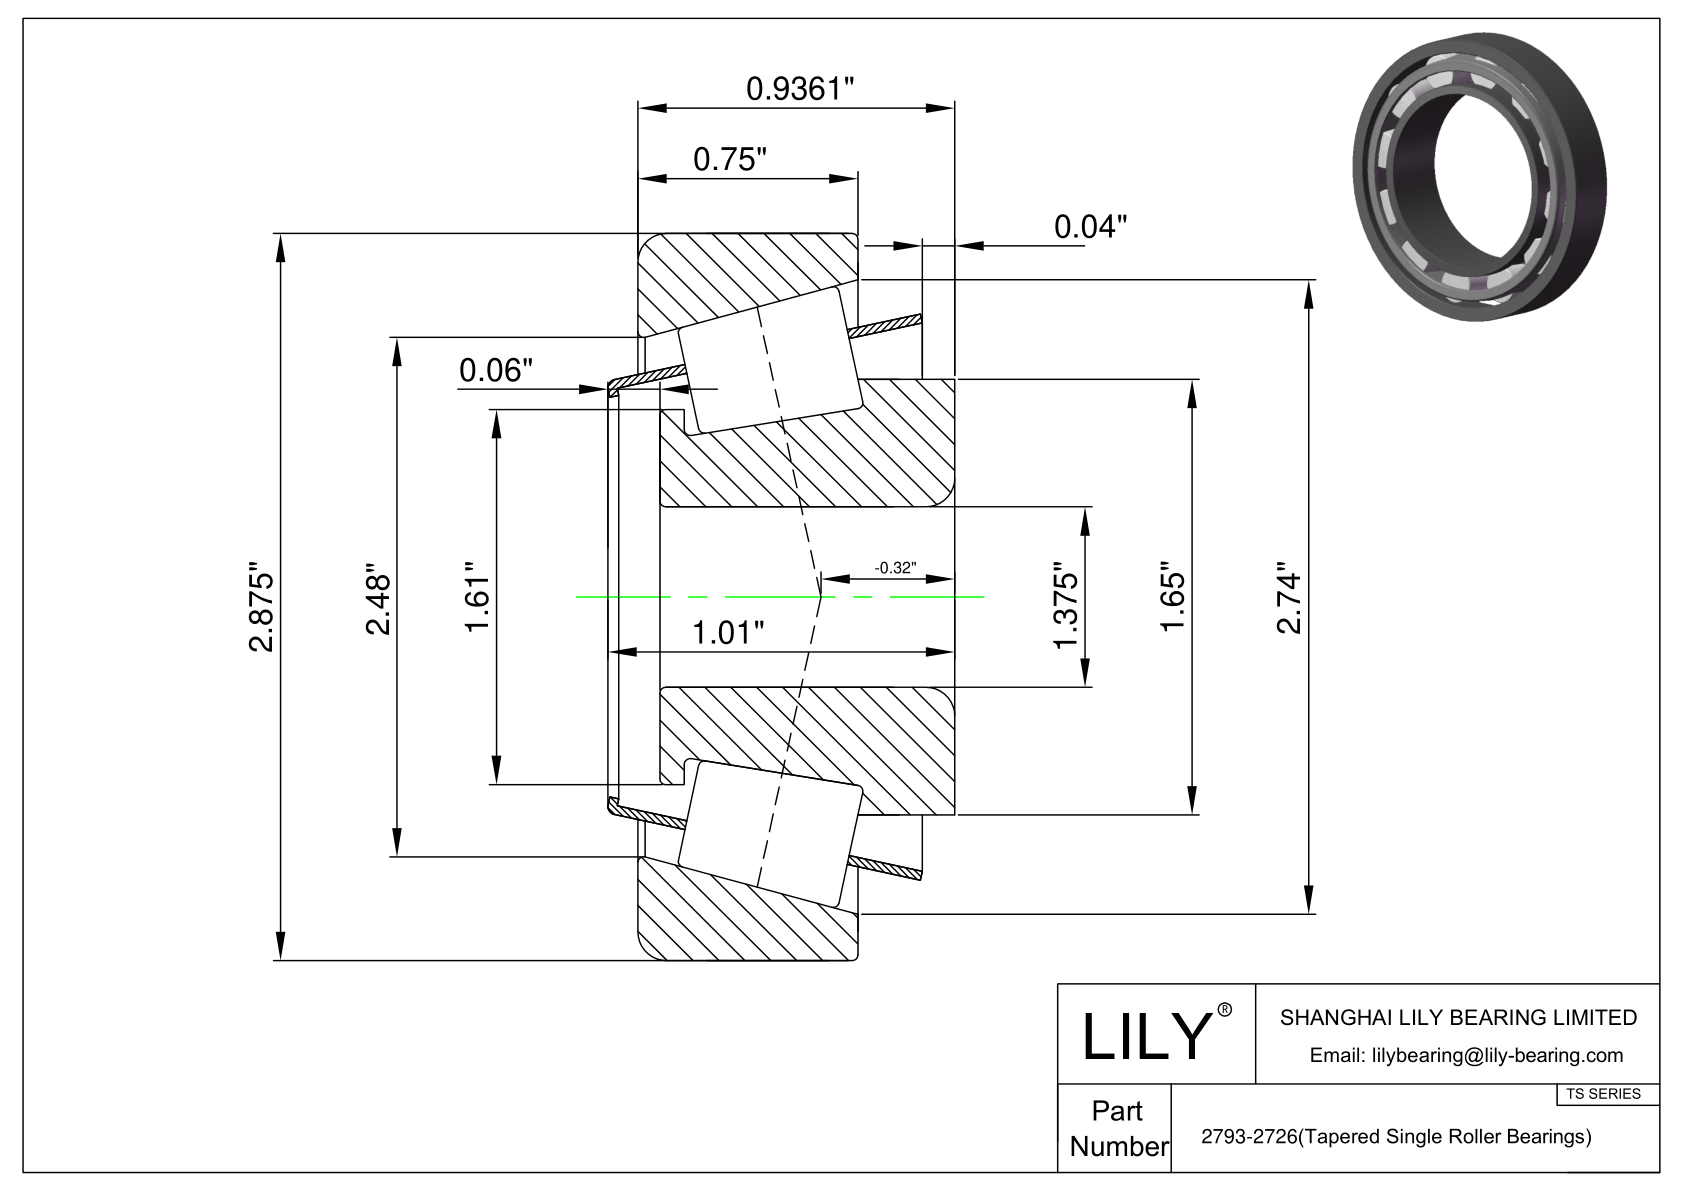 2793-2726 TS (Tapered Single Roller Bearings) (Imperial) cad drawing